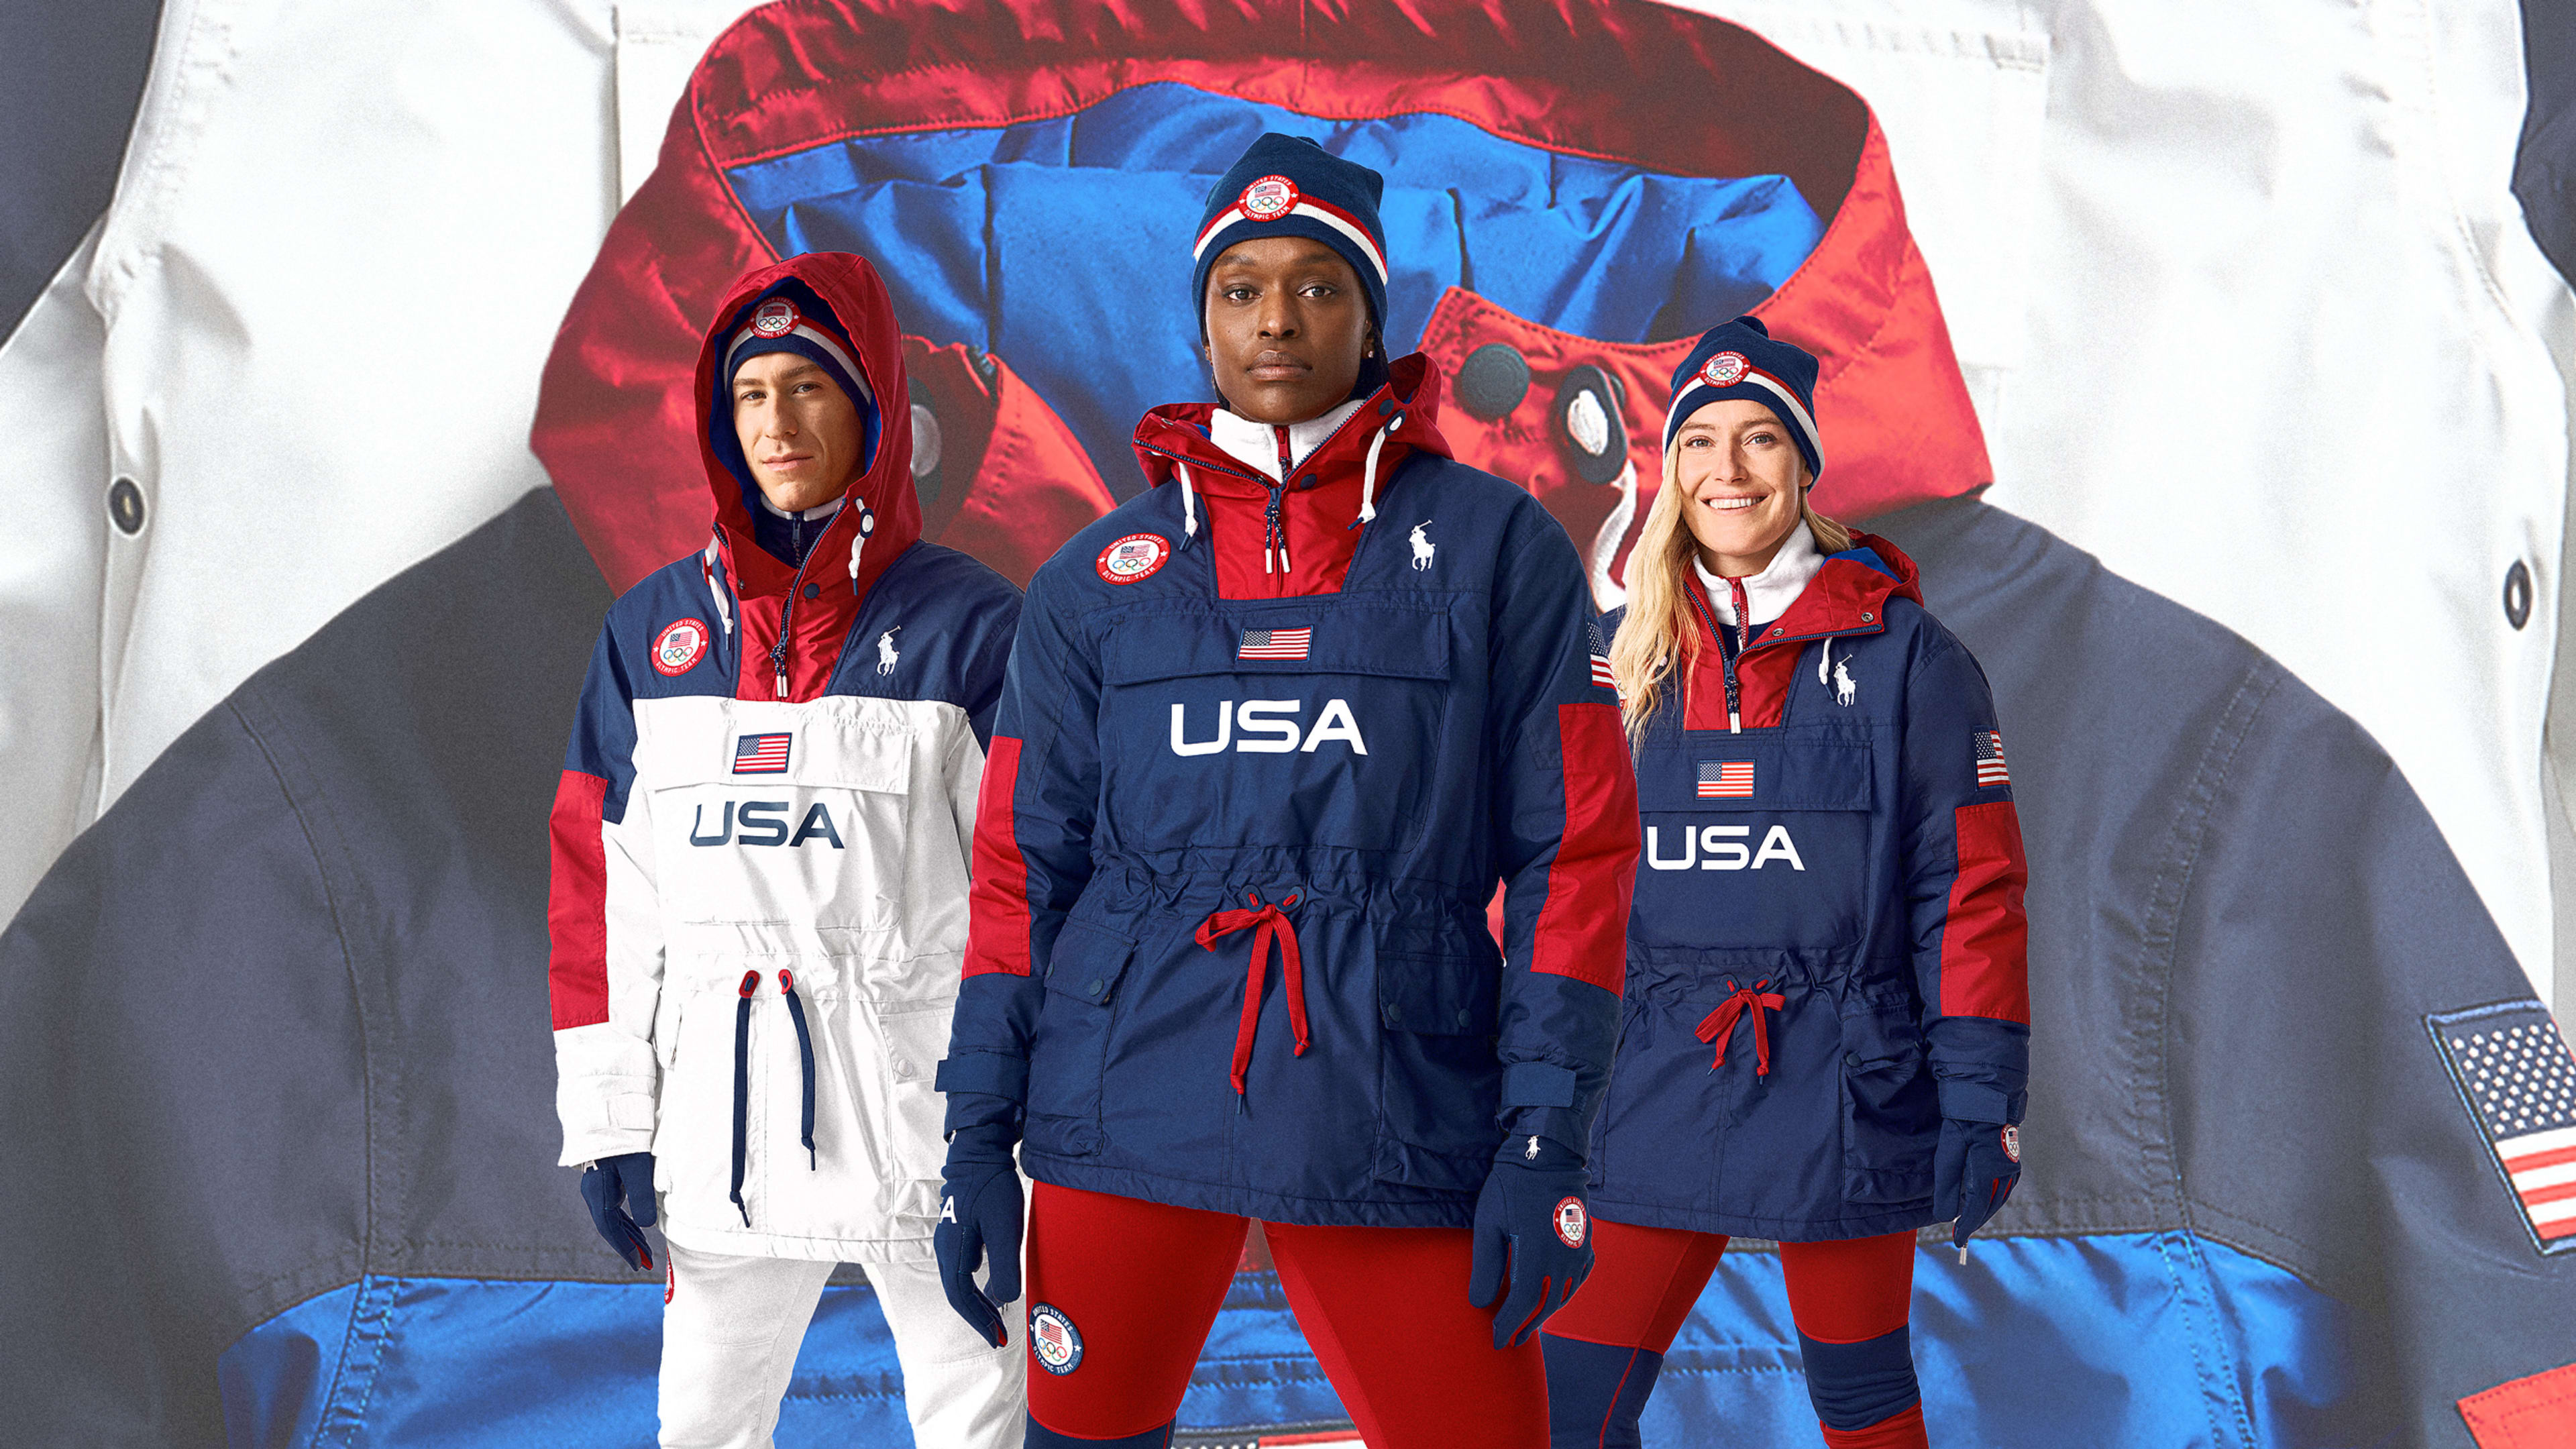 Ralph Lauren’s Olympic jackets automatically adapt to athletes’ body temp